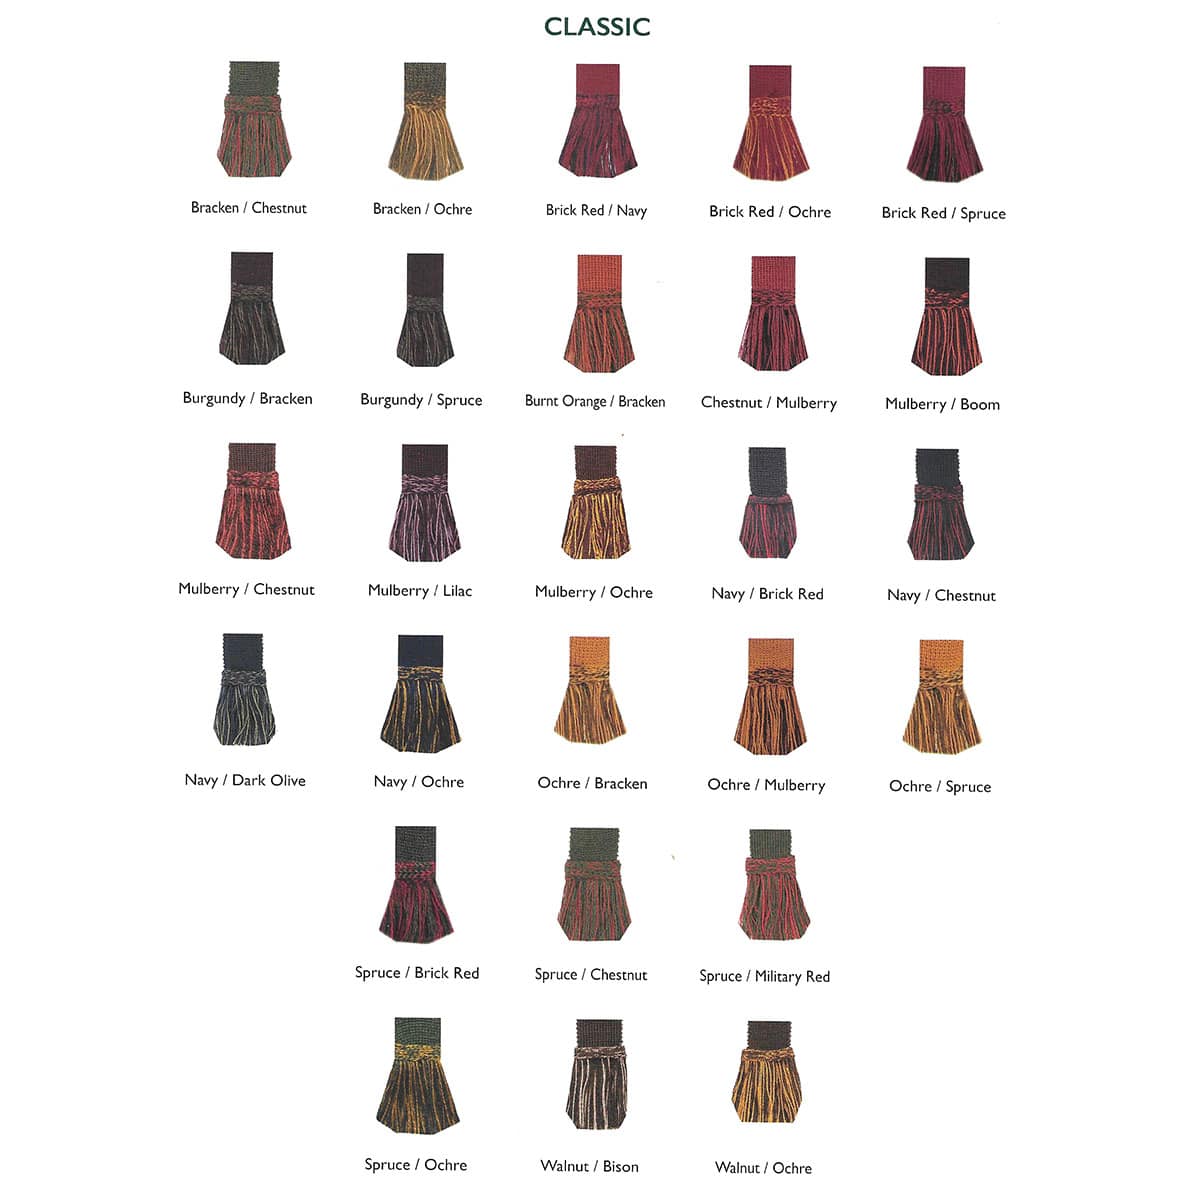 A color chart labeled "Classic" displays 26 swatches with different color combinations and names such as Bracken/Chestnut, Navy/Dark Olive, and Spruce/Brick Red—perfect for those seeking Traditional Multi-Color Self Tie Flashes.